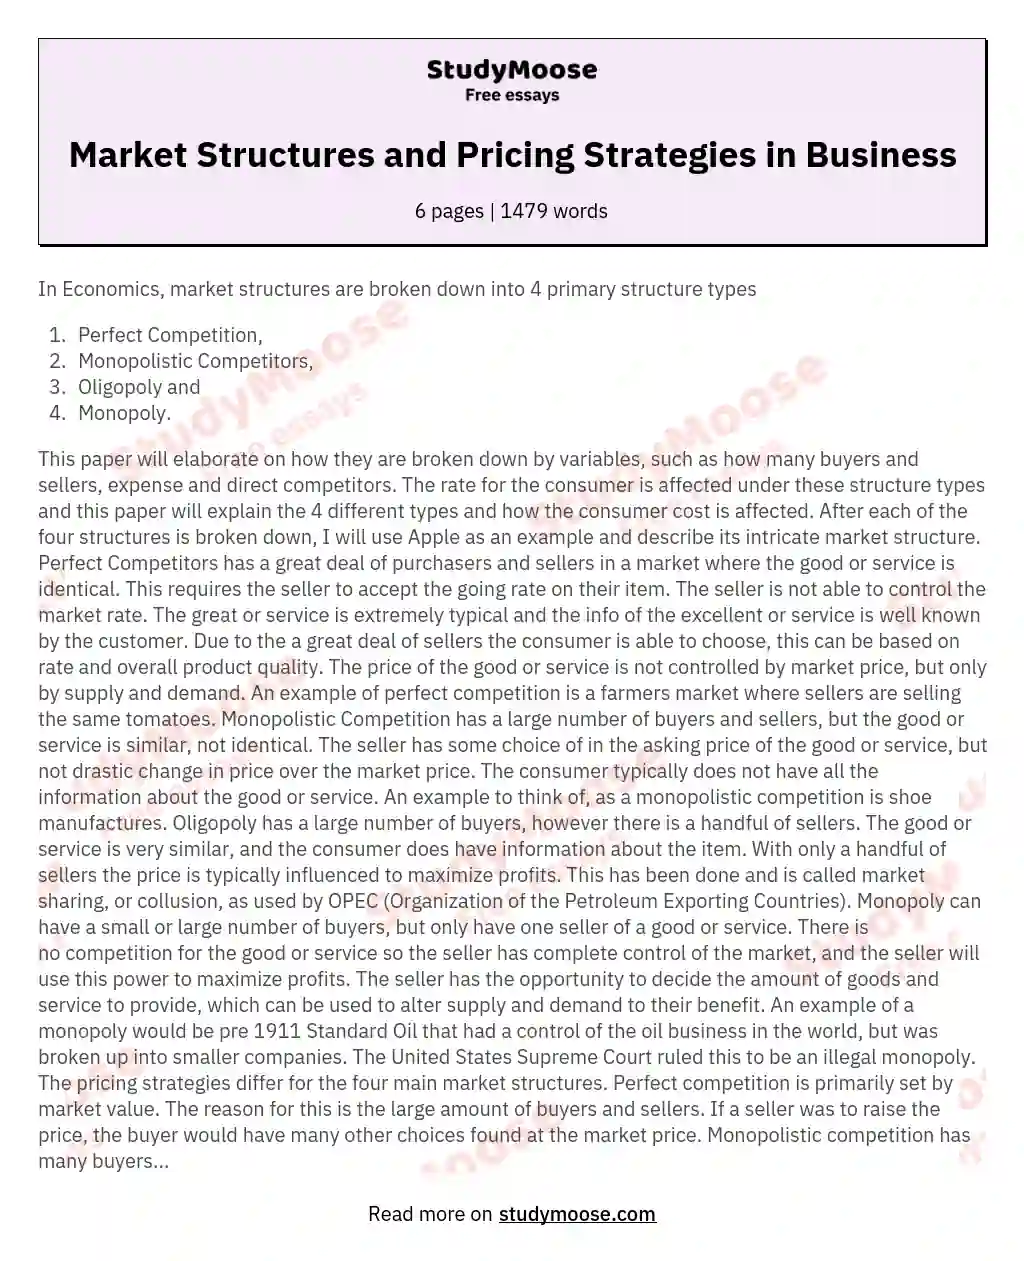 Market Structures and Pricing Strategies in Business essay